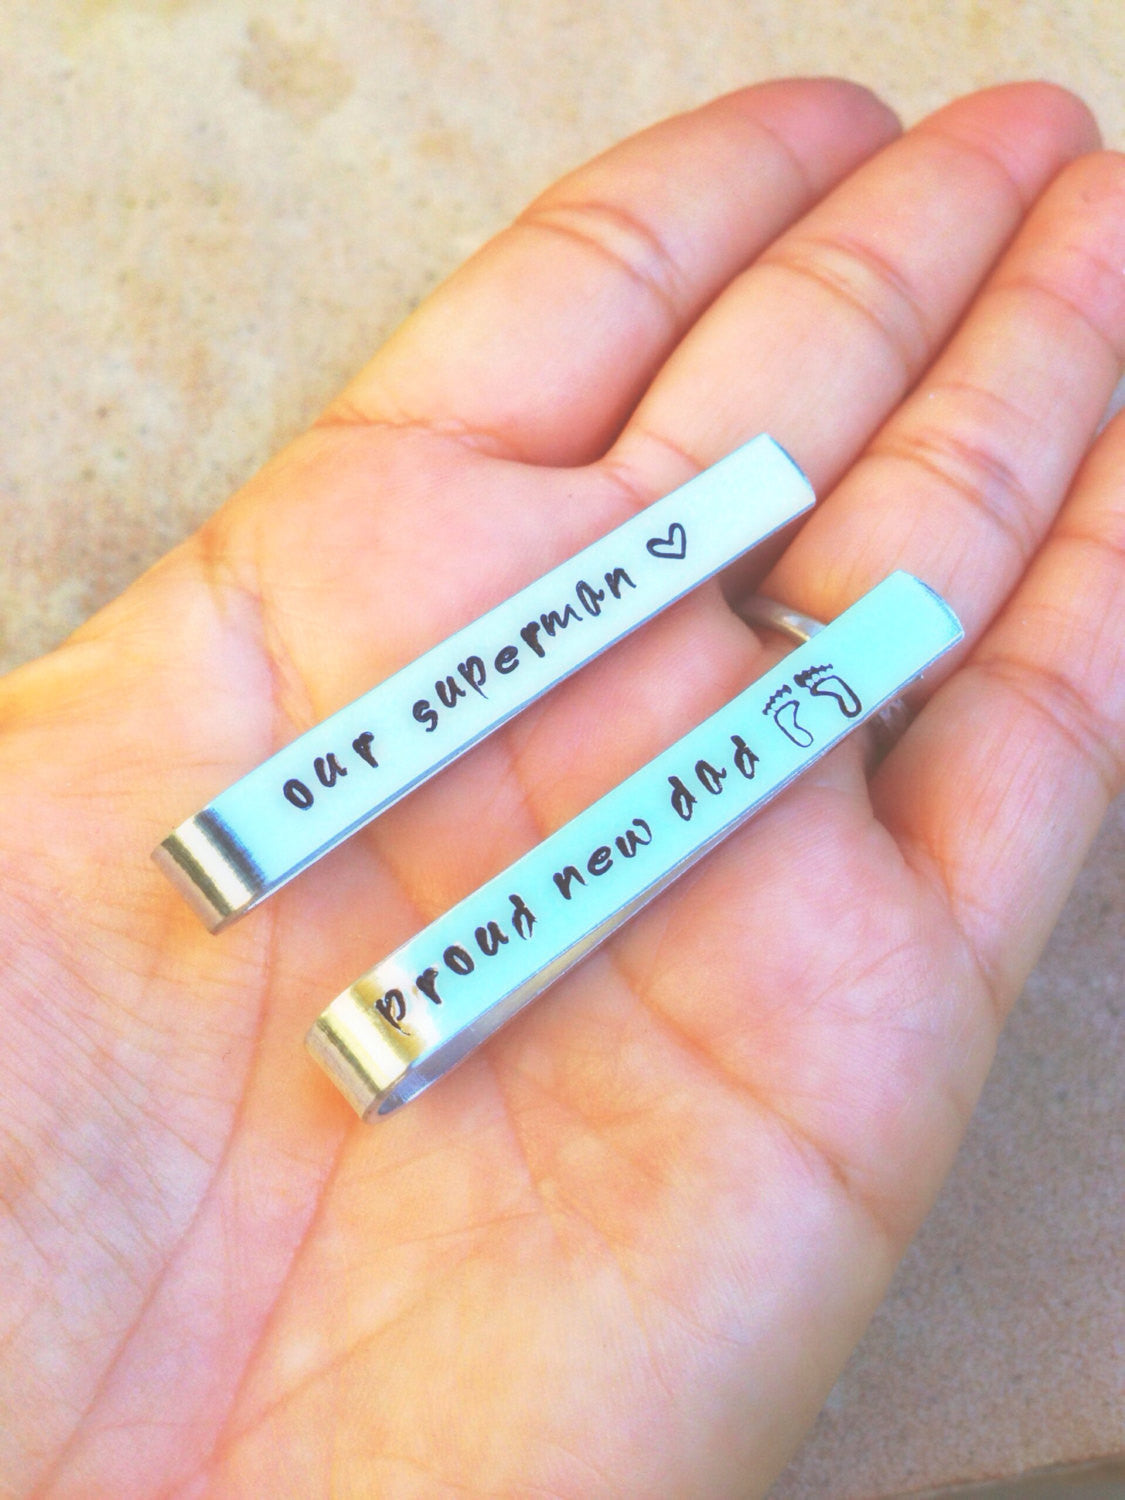 Tie Bar, Boyfriend Gift,Personalized Tie Bar,Groomsmen Gifts, Hand Stamped Tie Bars, natashaaloha - Natashaaloha, jewelry, bracelets, necklace, keychains, fishing lures, gifts for men, charms, personalized, 